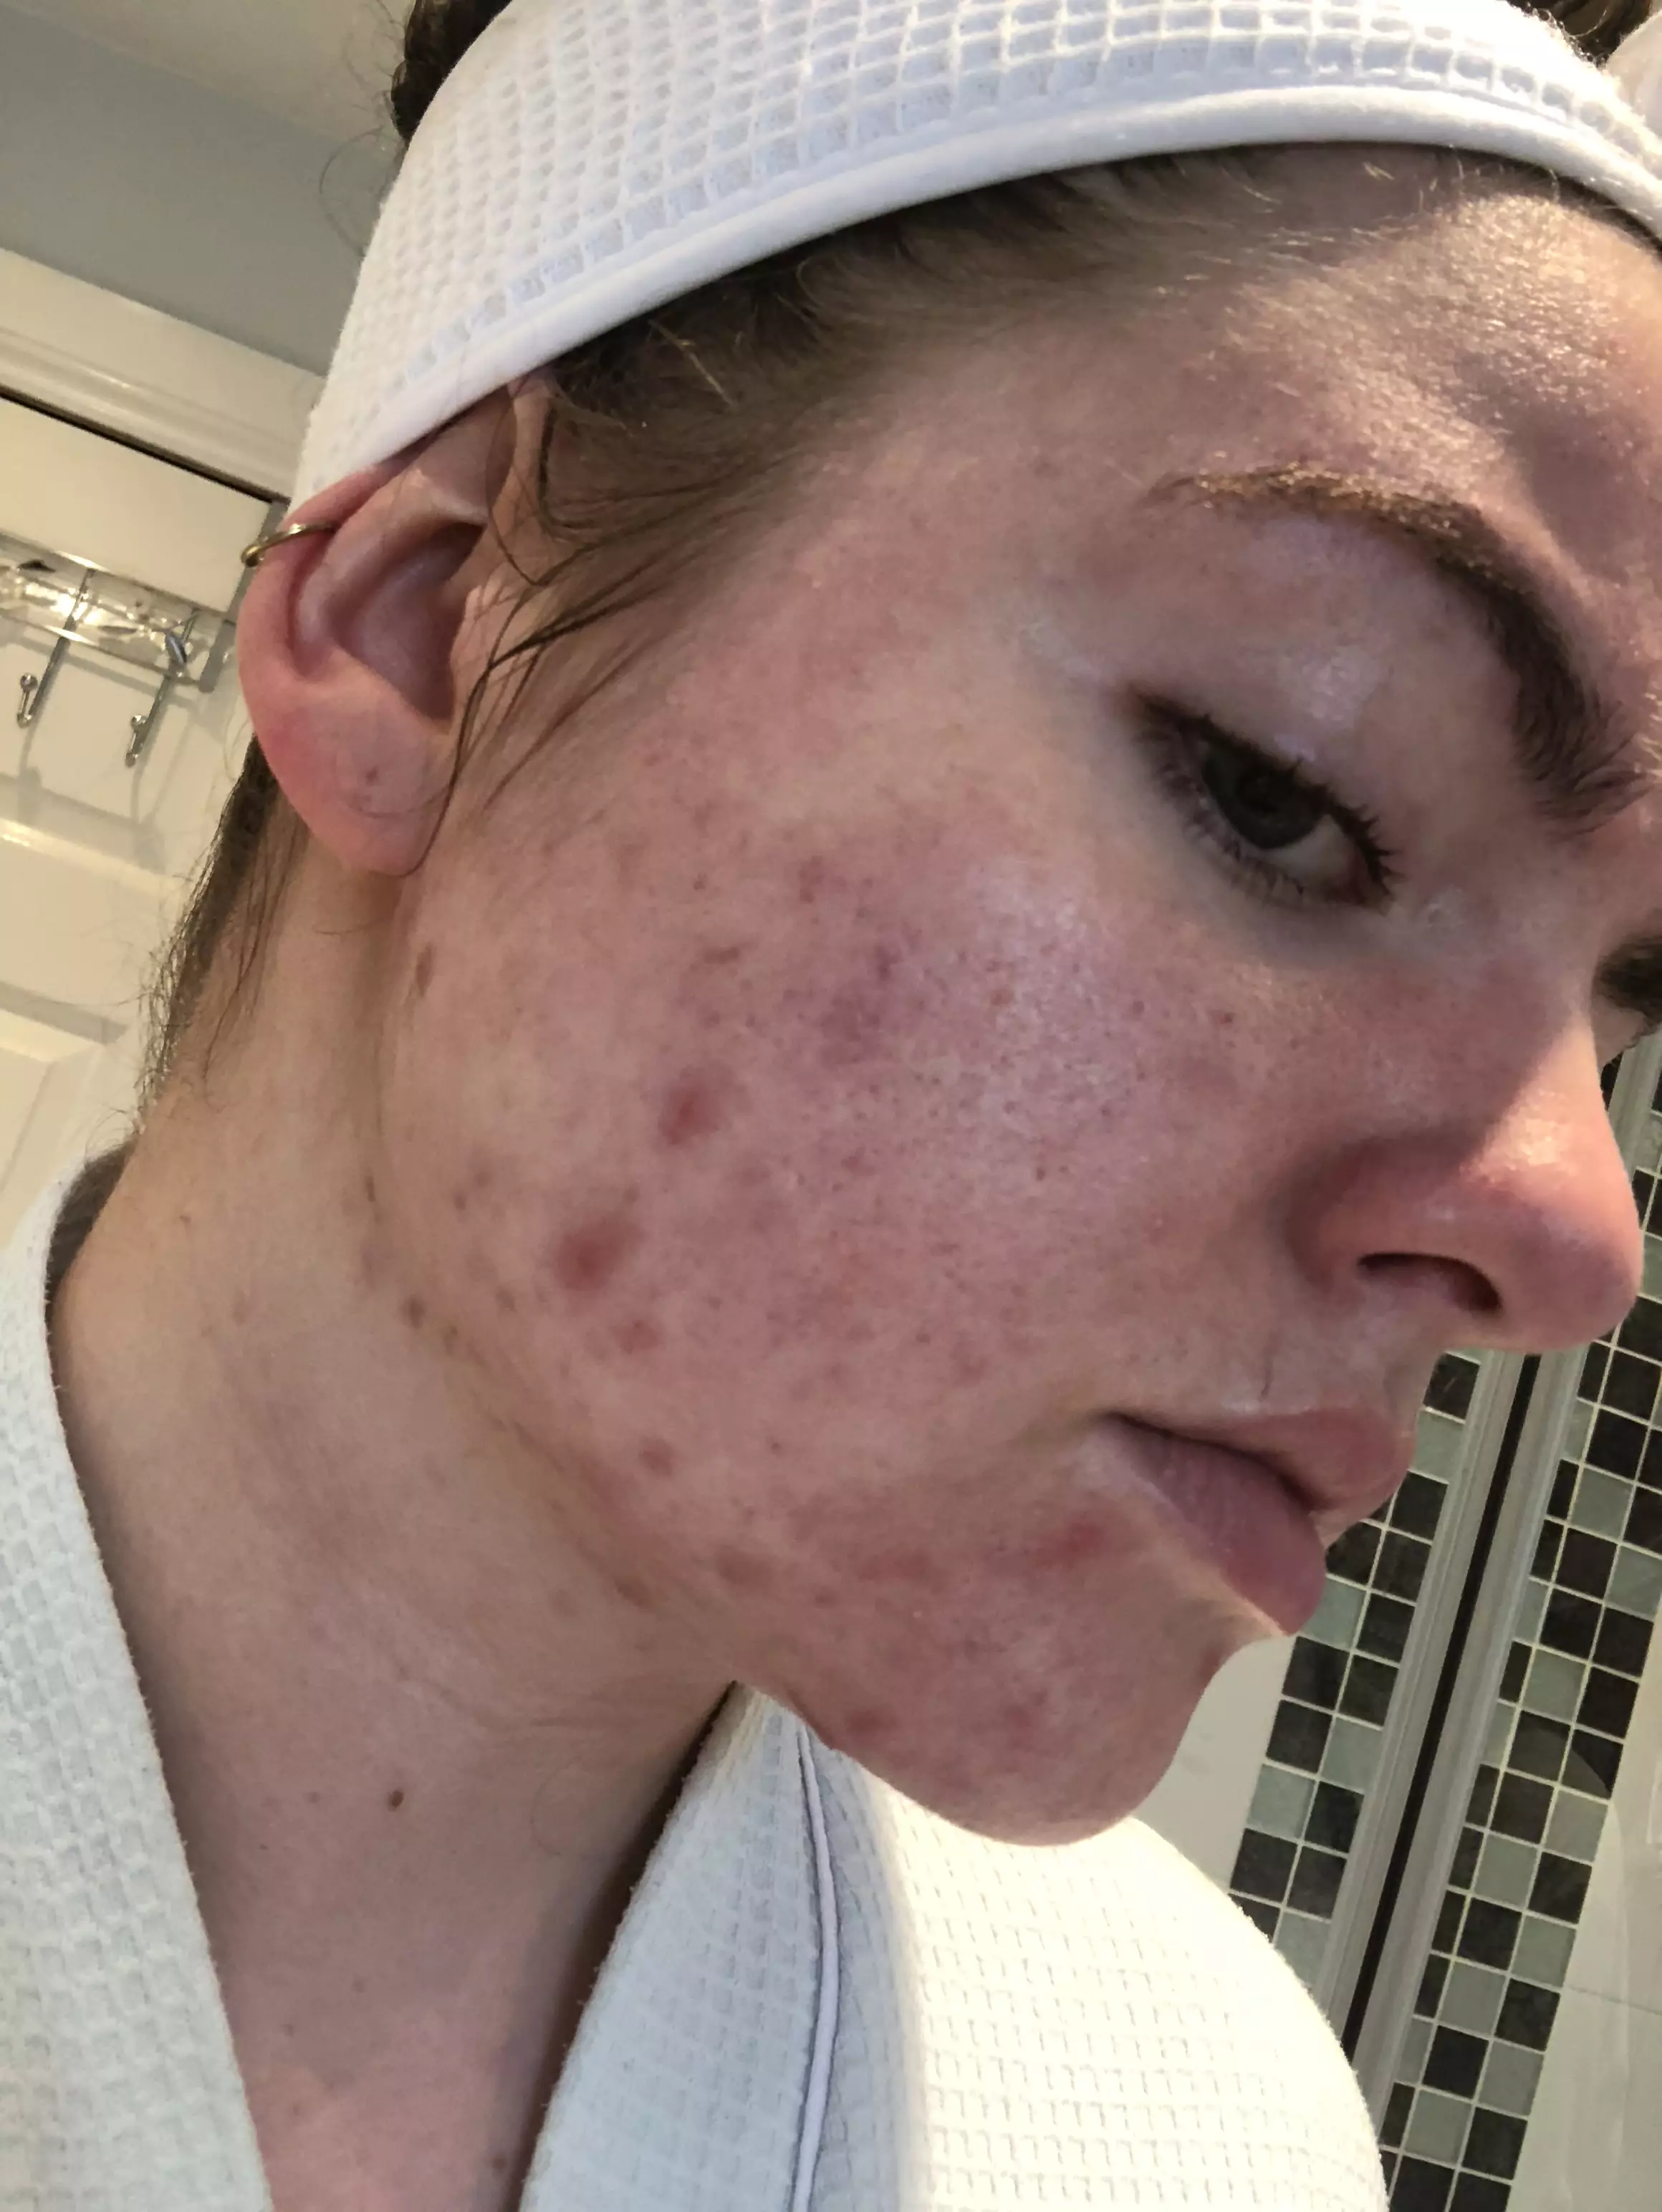 Vanessa's acne used to knock her confidence (